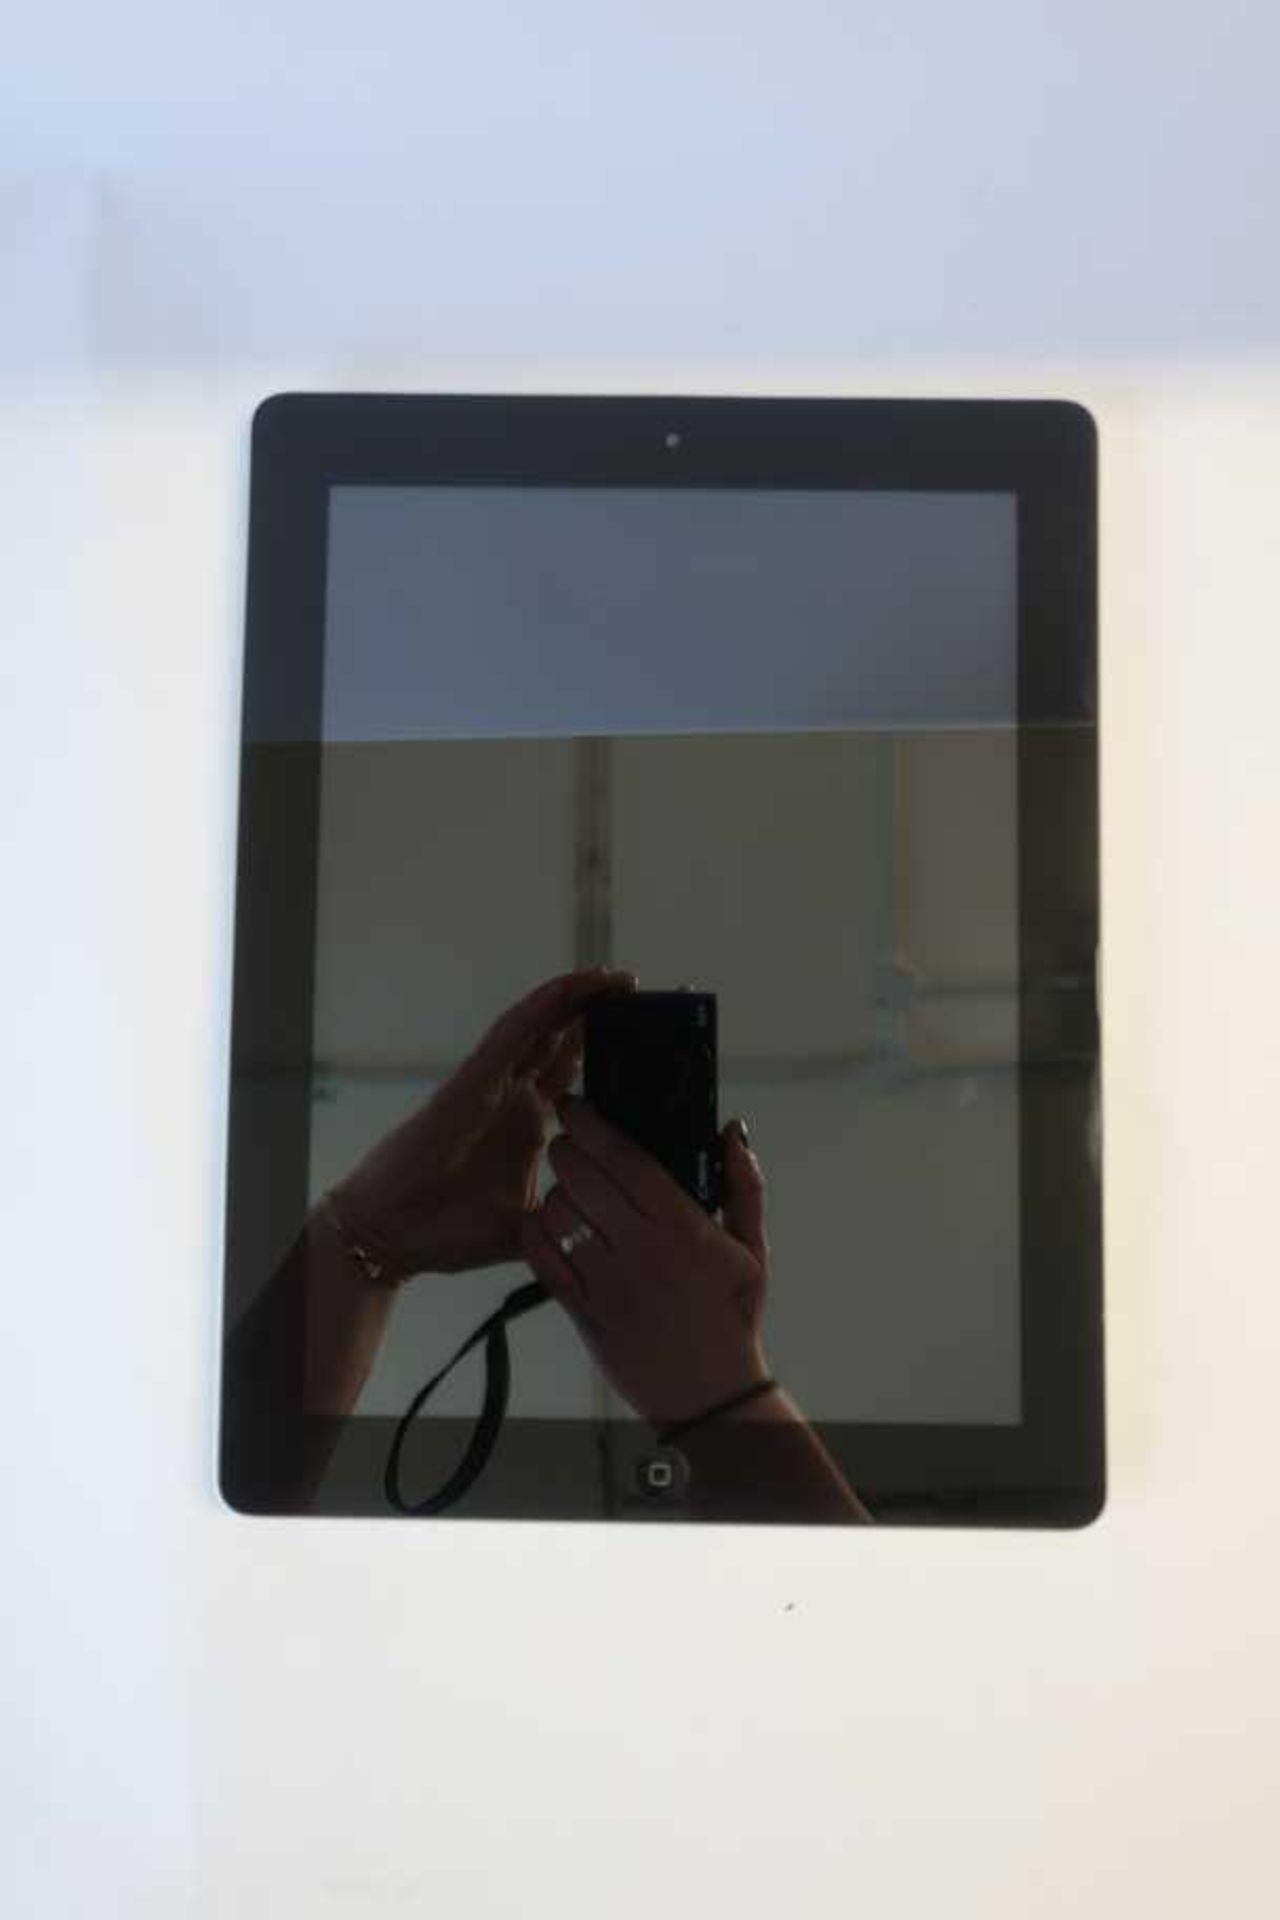 A pre-owned Apple iPad 3rd Gen (Wi-Fi Only) A1416 32GB in Black (Serial: DMPHHSBCDVD2) (Activation